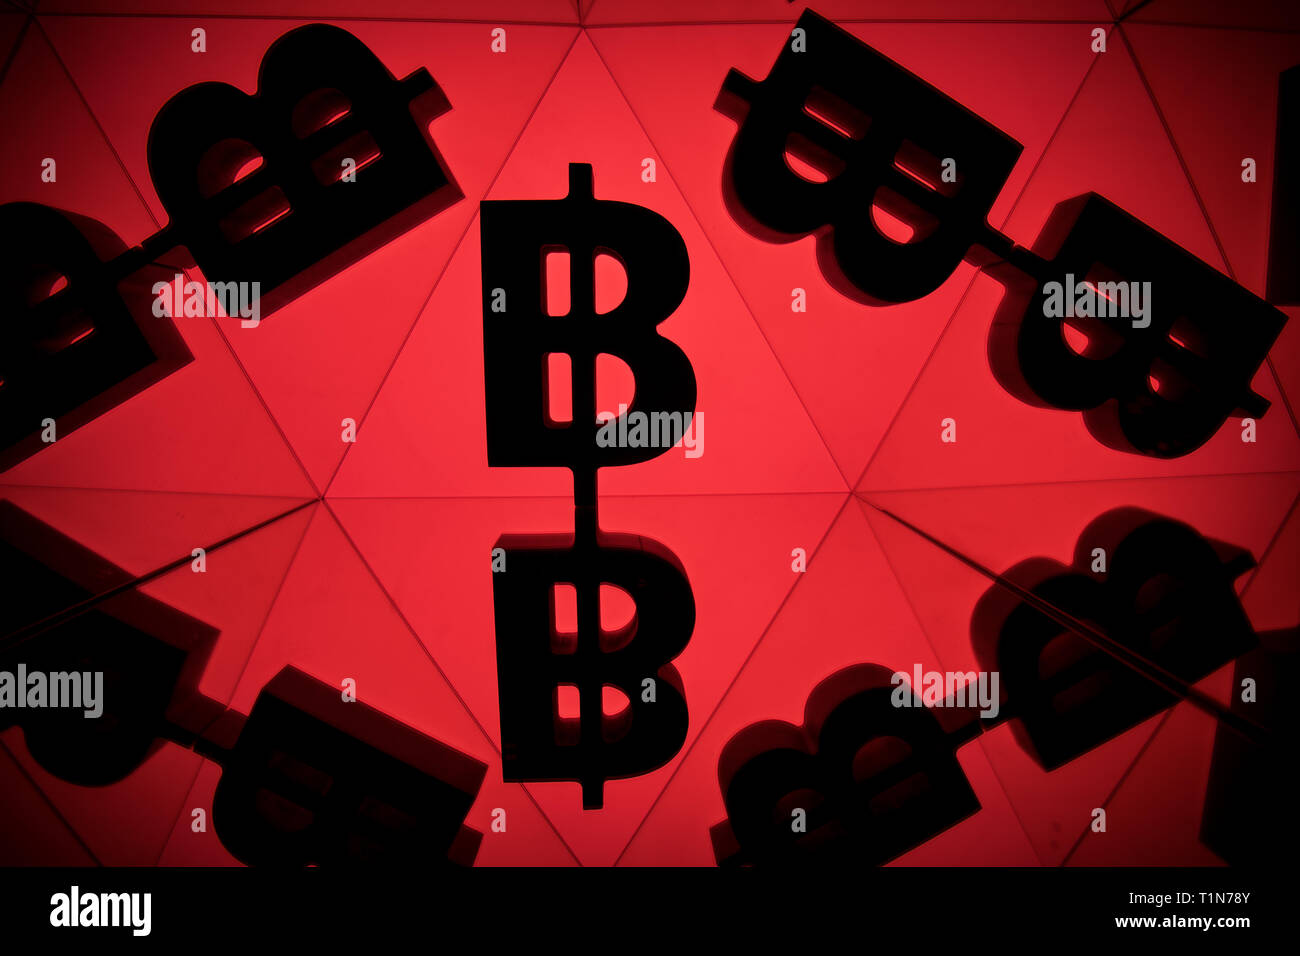 Bitcoin Currency Symbol With Many Mirroring Images of Itself on Red Background Stock Photo